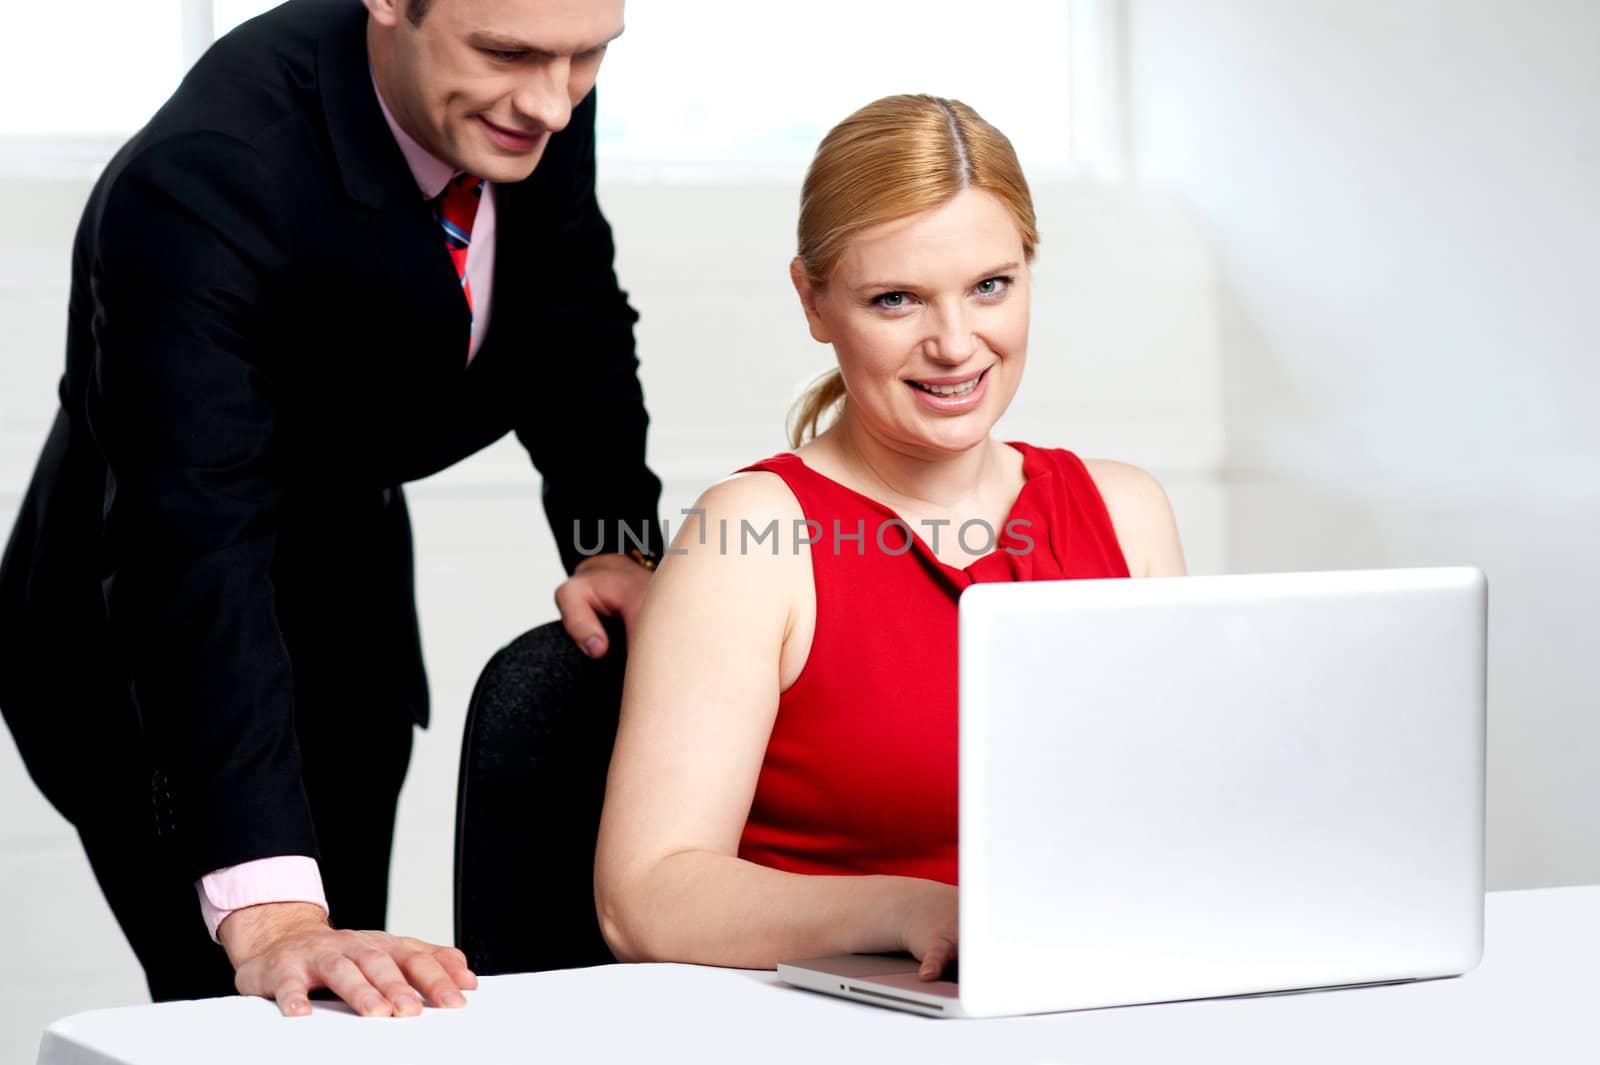 Trendy female boss working on laptop with man assisting